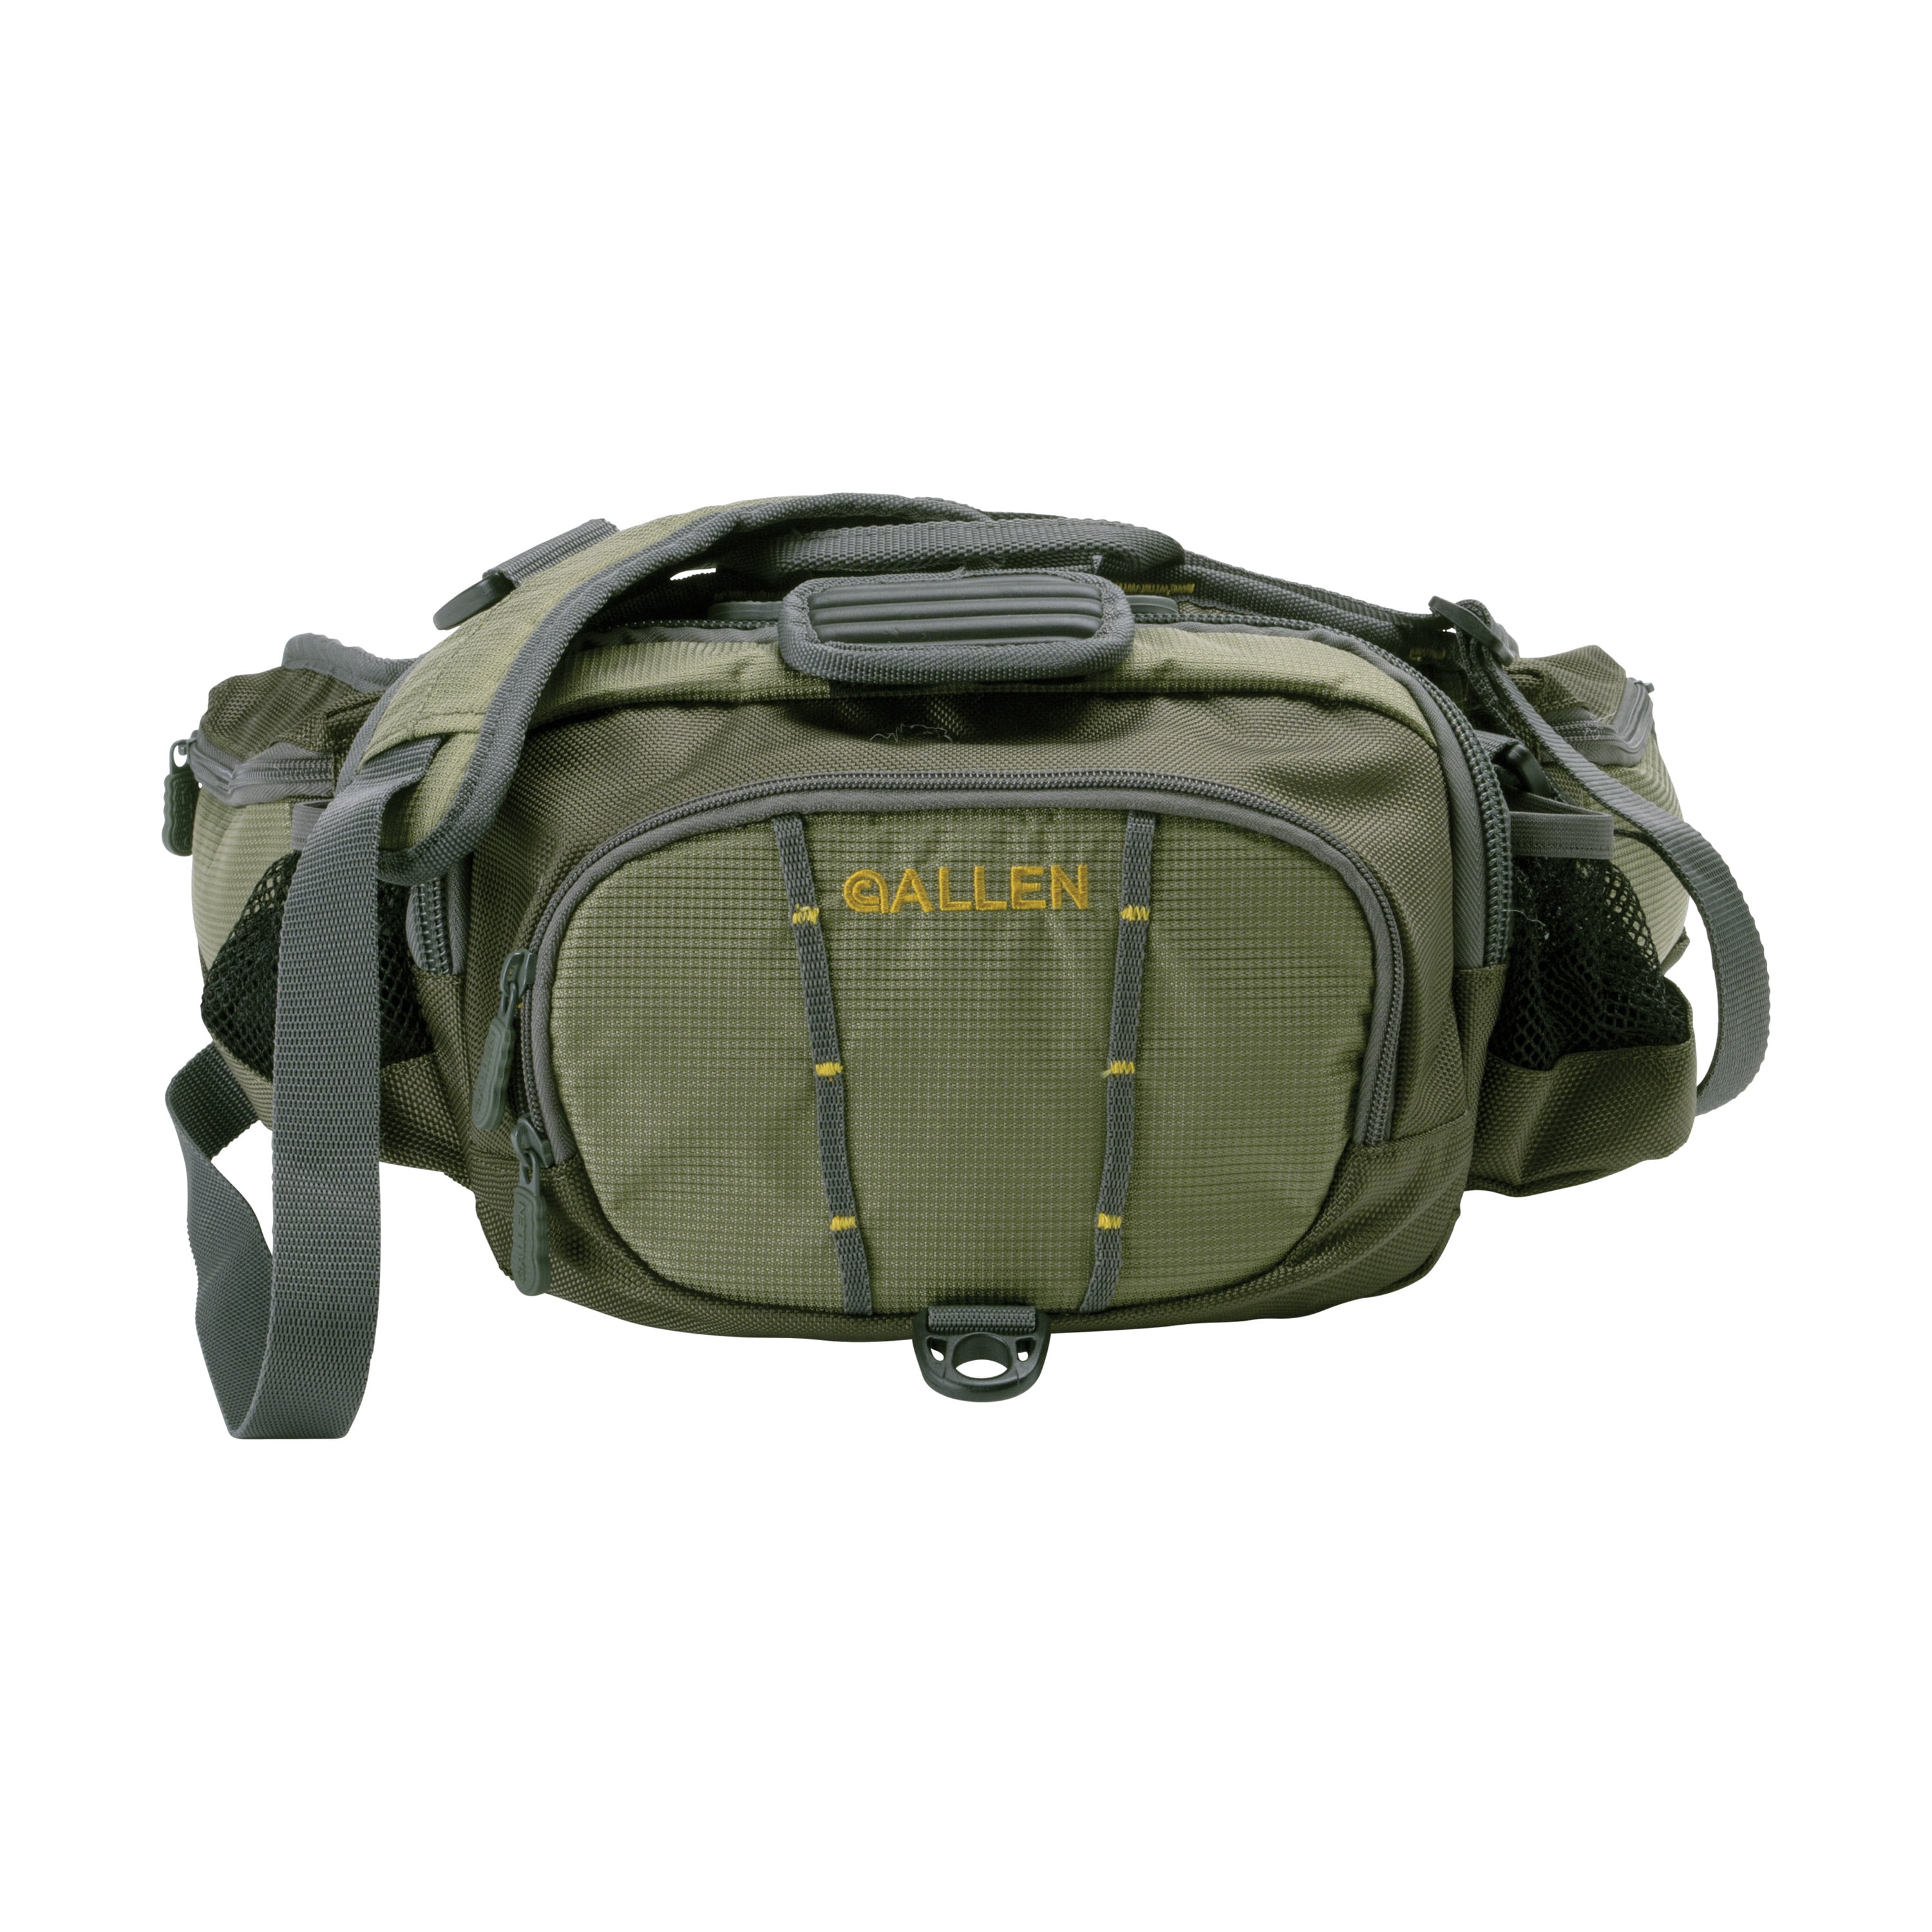 Allen Company Eagle River Lumbar Fishing-Pack, Olive, One Size